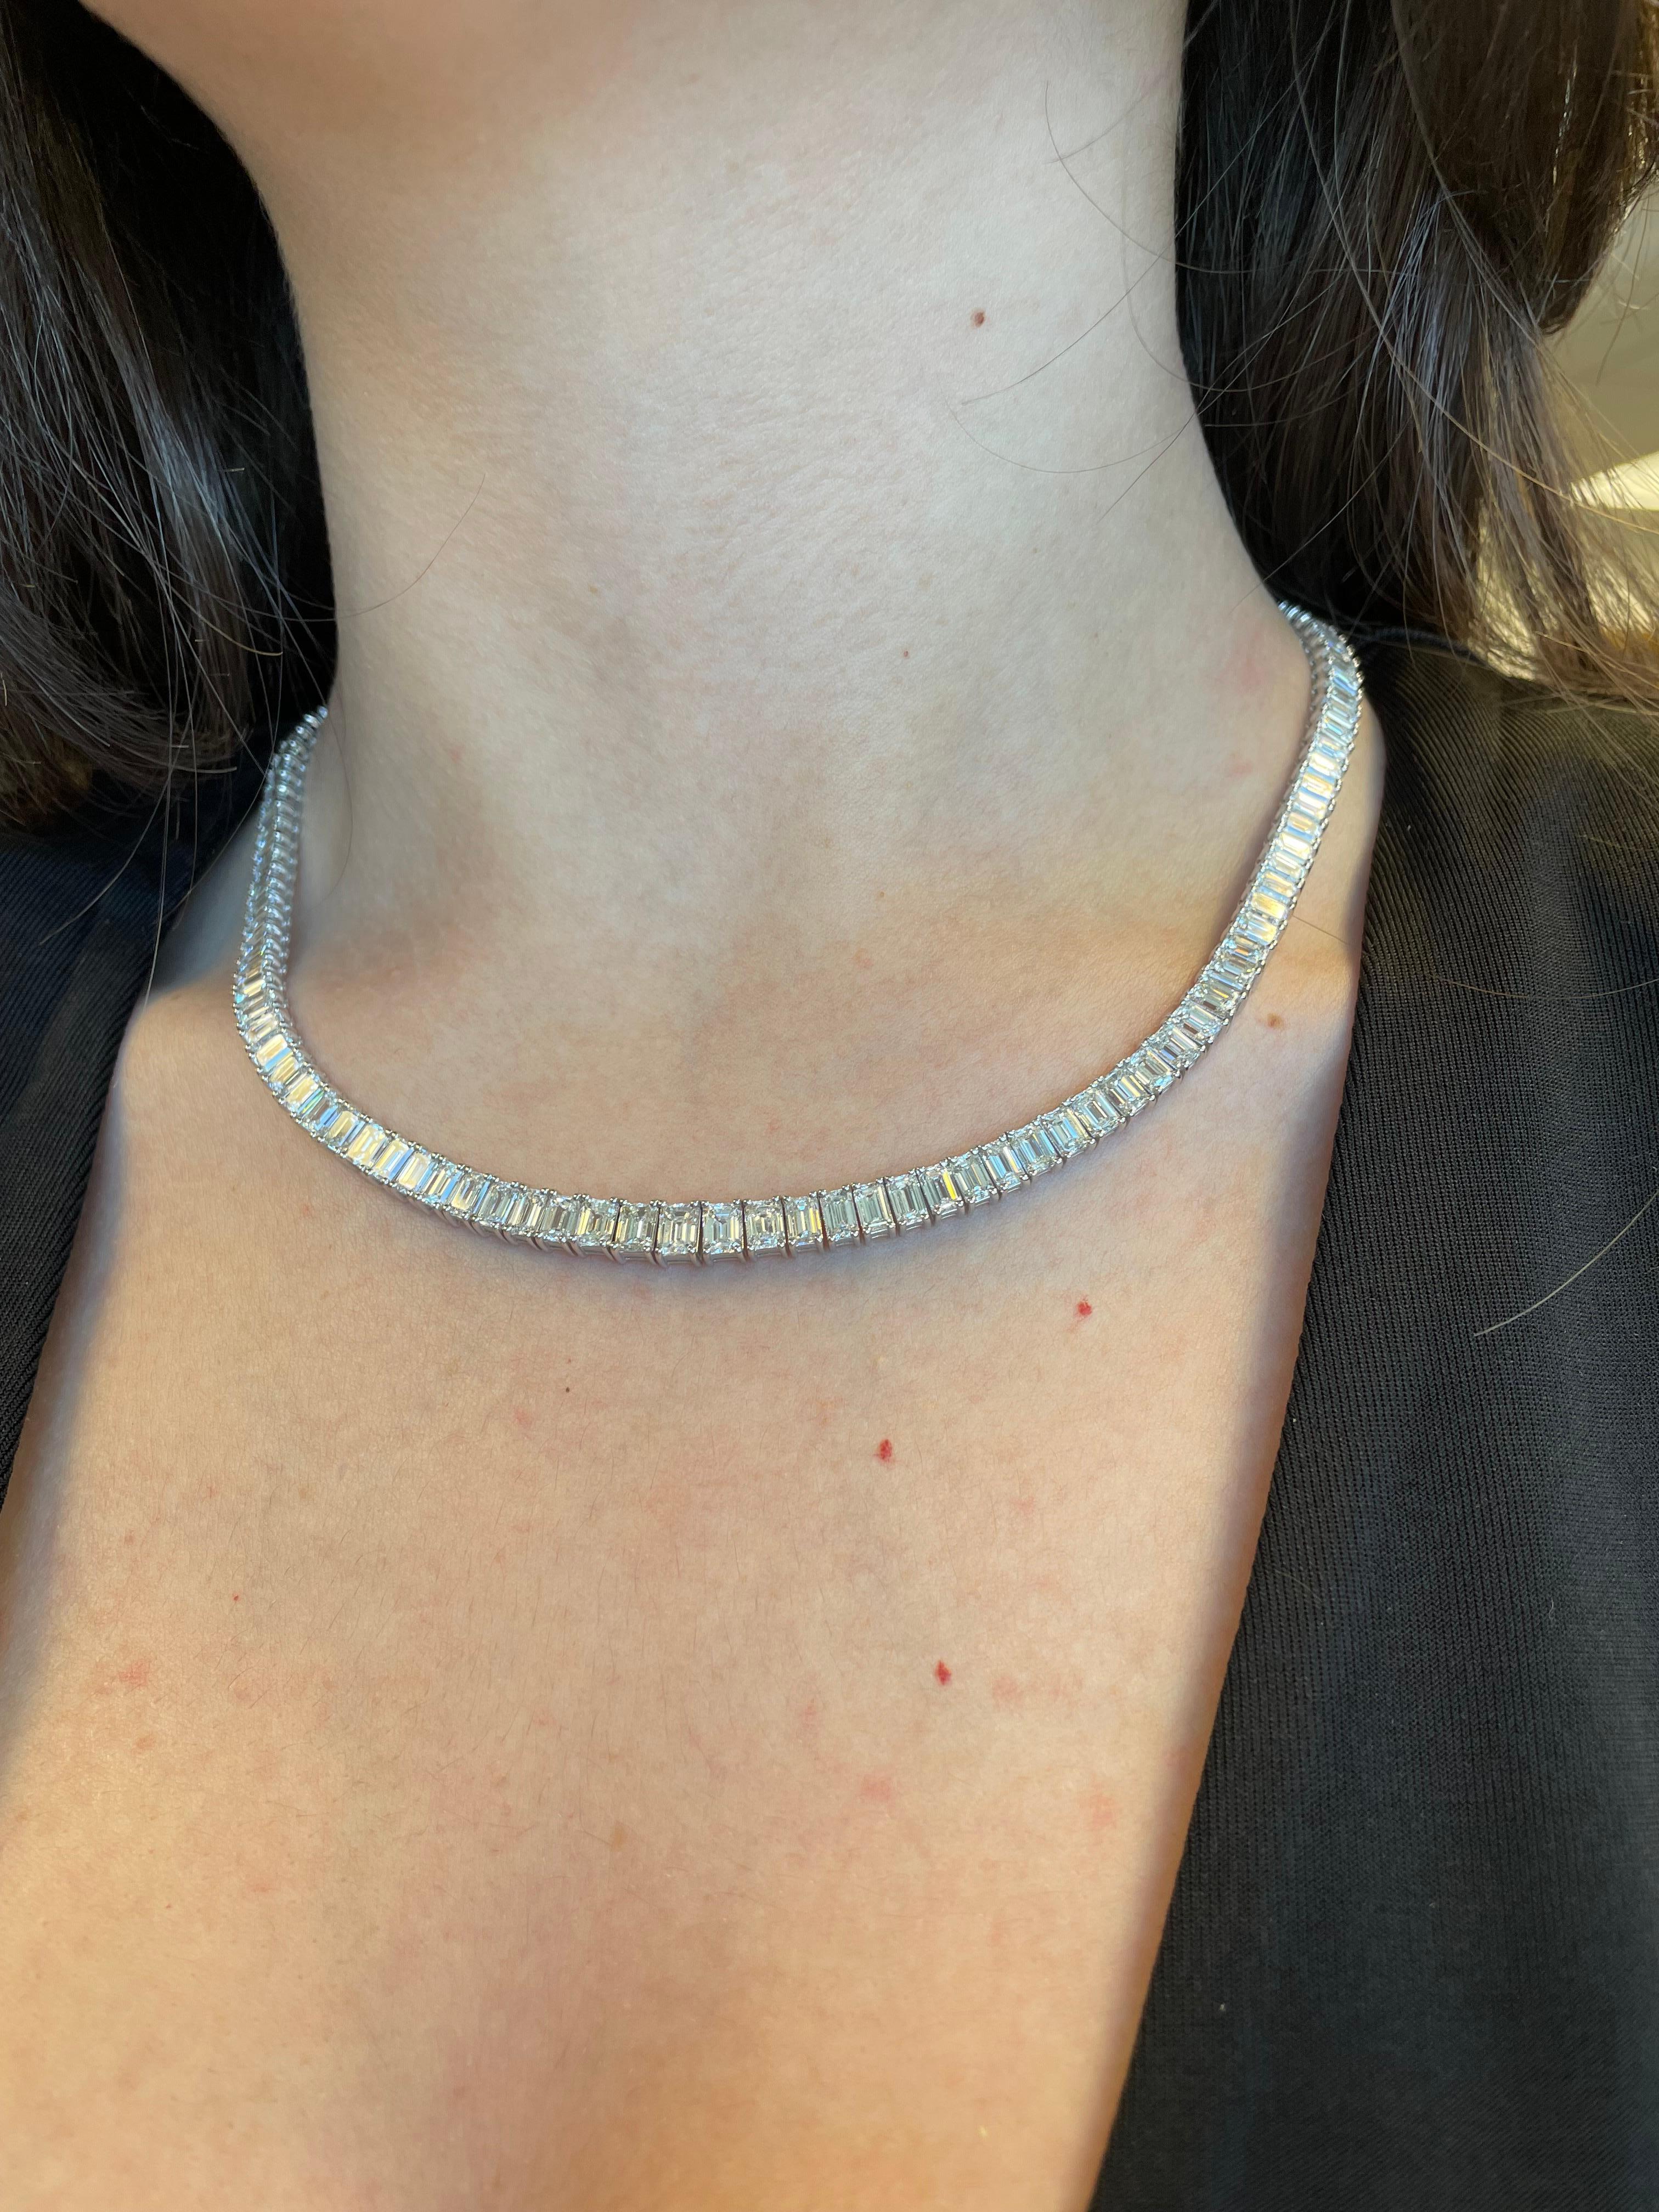 Exquisite and timeless diamonds tennis necklace. Created by Alexander Beverly Hills.
125 emerald cut diamonds, 42.00 carats total. Approximately G/H color and VS clarity. Four prong set in 18k white gold. Accommodated with an up-to-date appraisal by